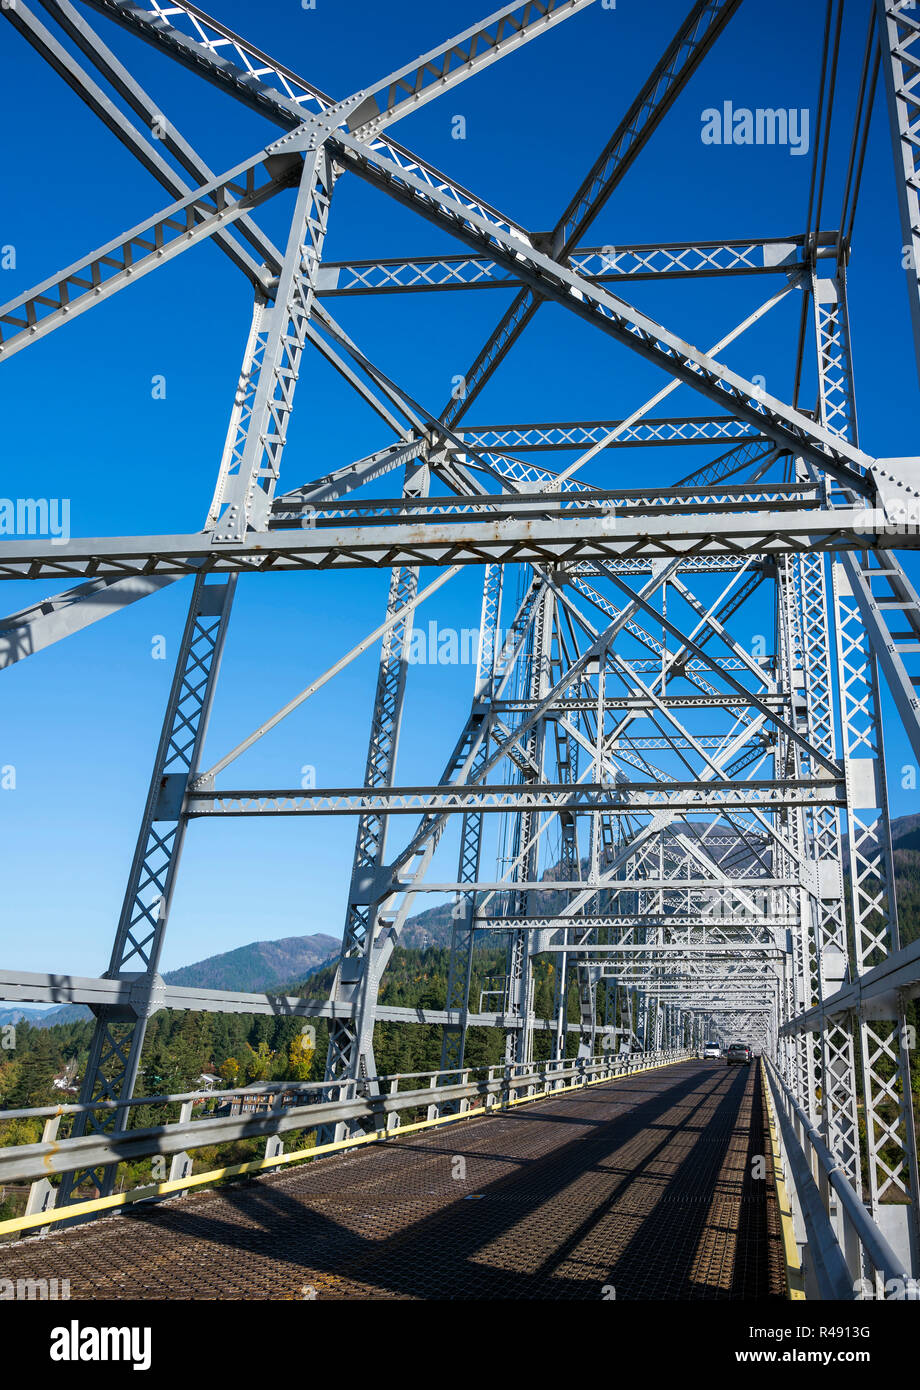 The truss Bridge of God over the Columbia River is located in a picturesque area of Columbia Gorge with hills and rocky mountains forest covered - an  Stock Photo